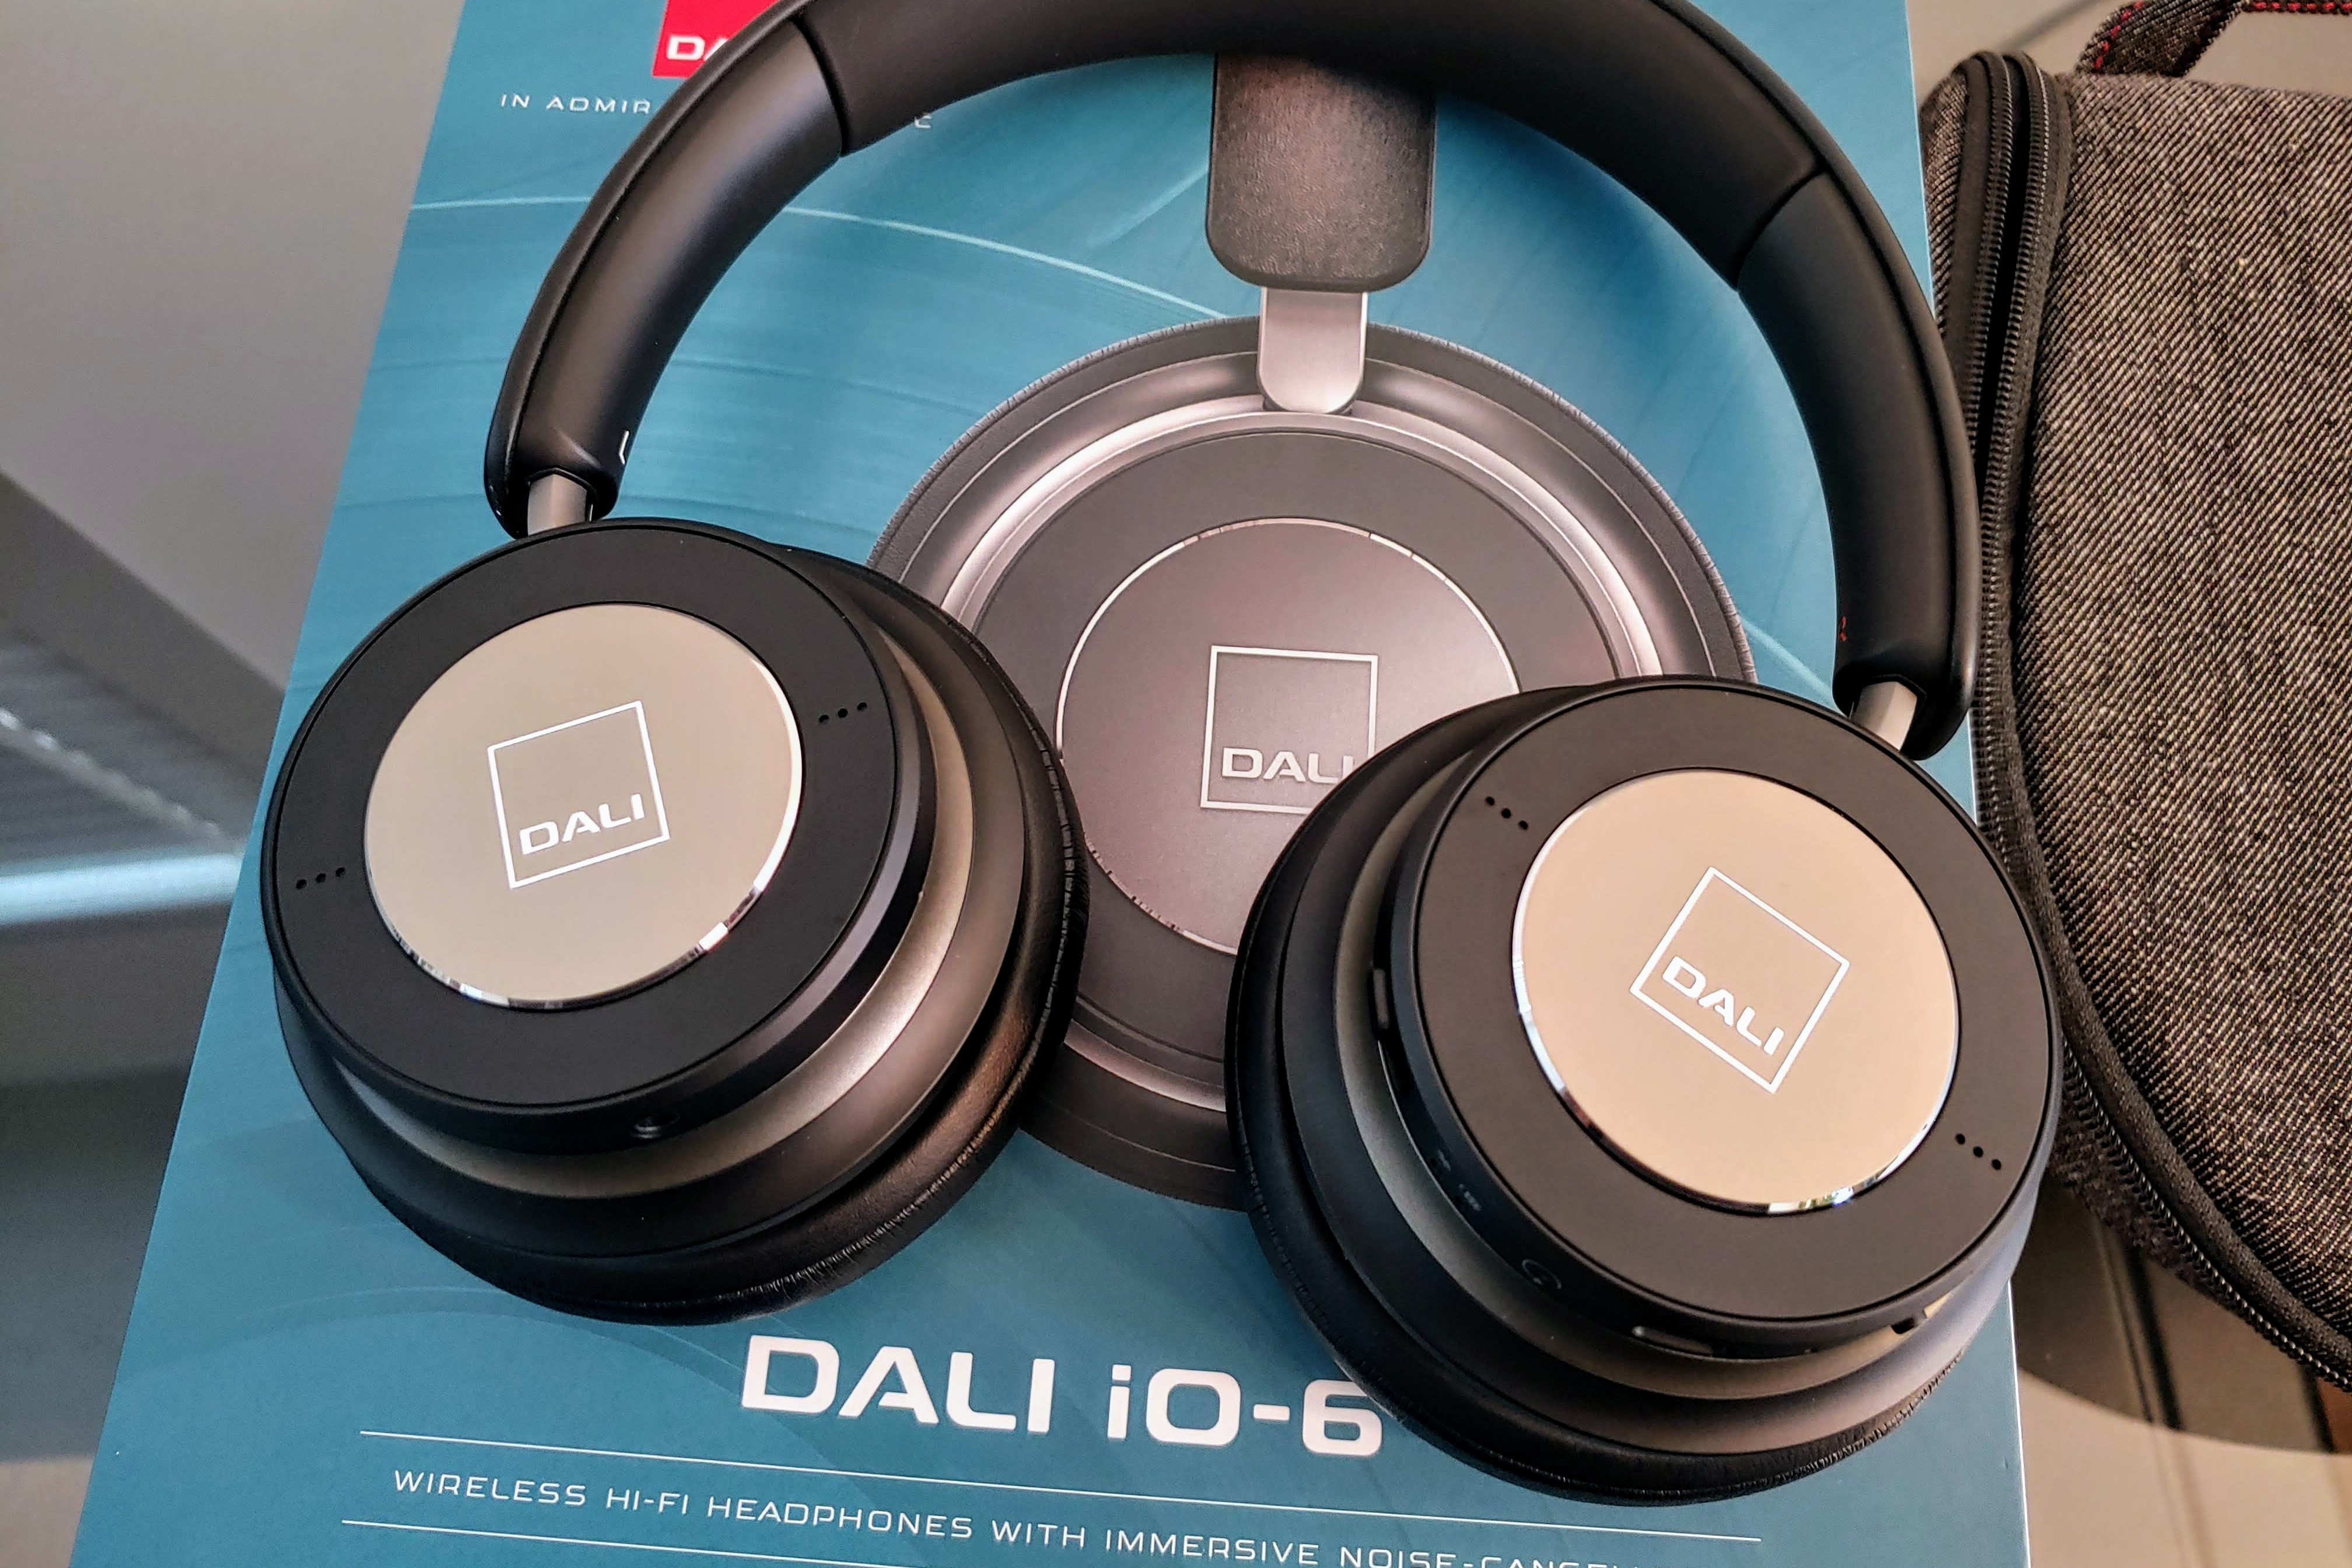 DALI IO-6 Premium Wireless ANC Headphones In The House: First Impressions And Unboxing Pics!